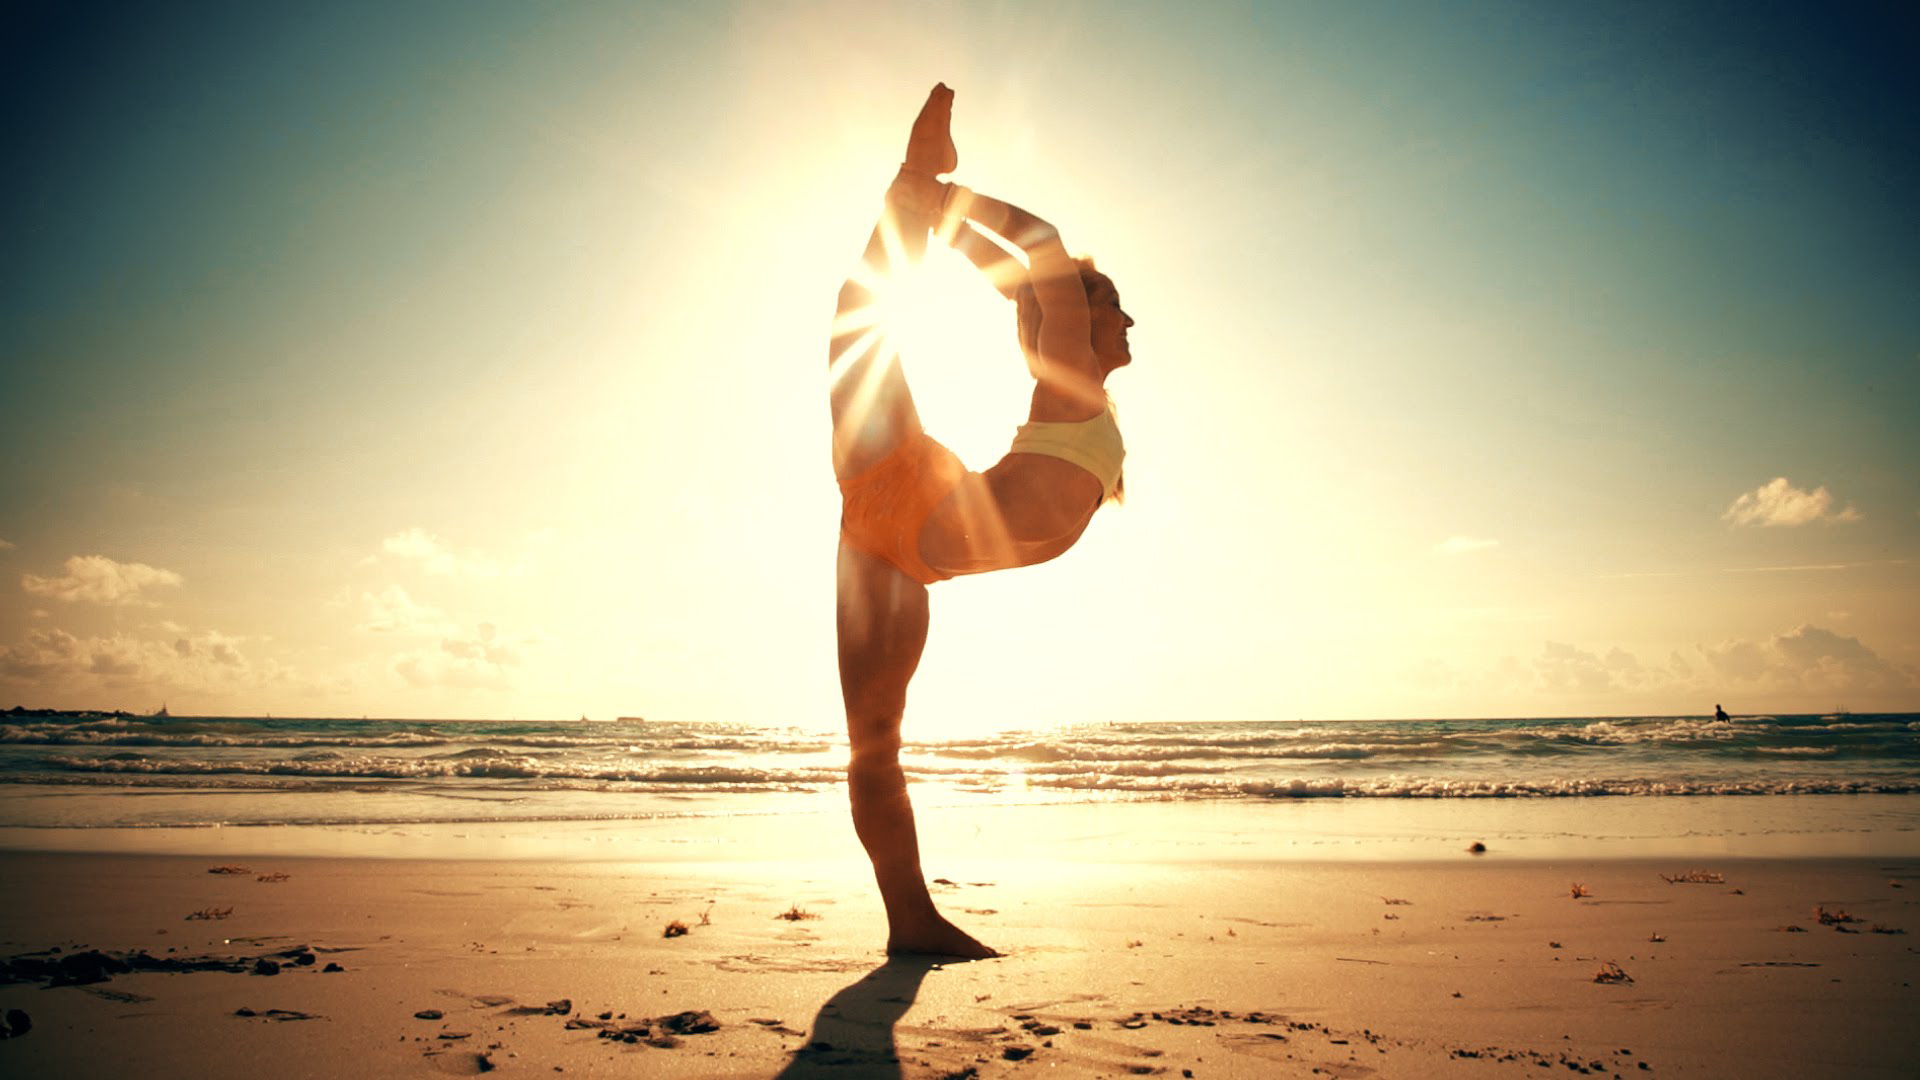 Yoga Pose with Sun Backlight in Beach Wallpaper. Wallpaper Download. High Resolution Wallpaper